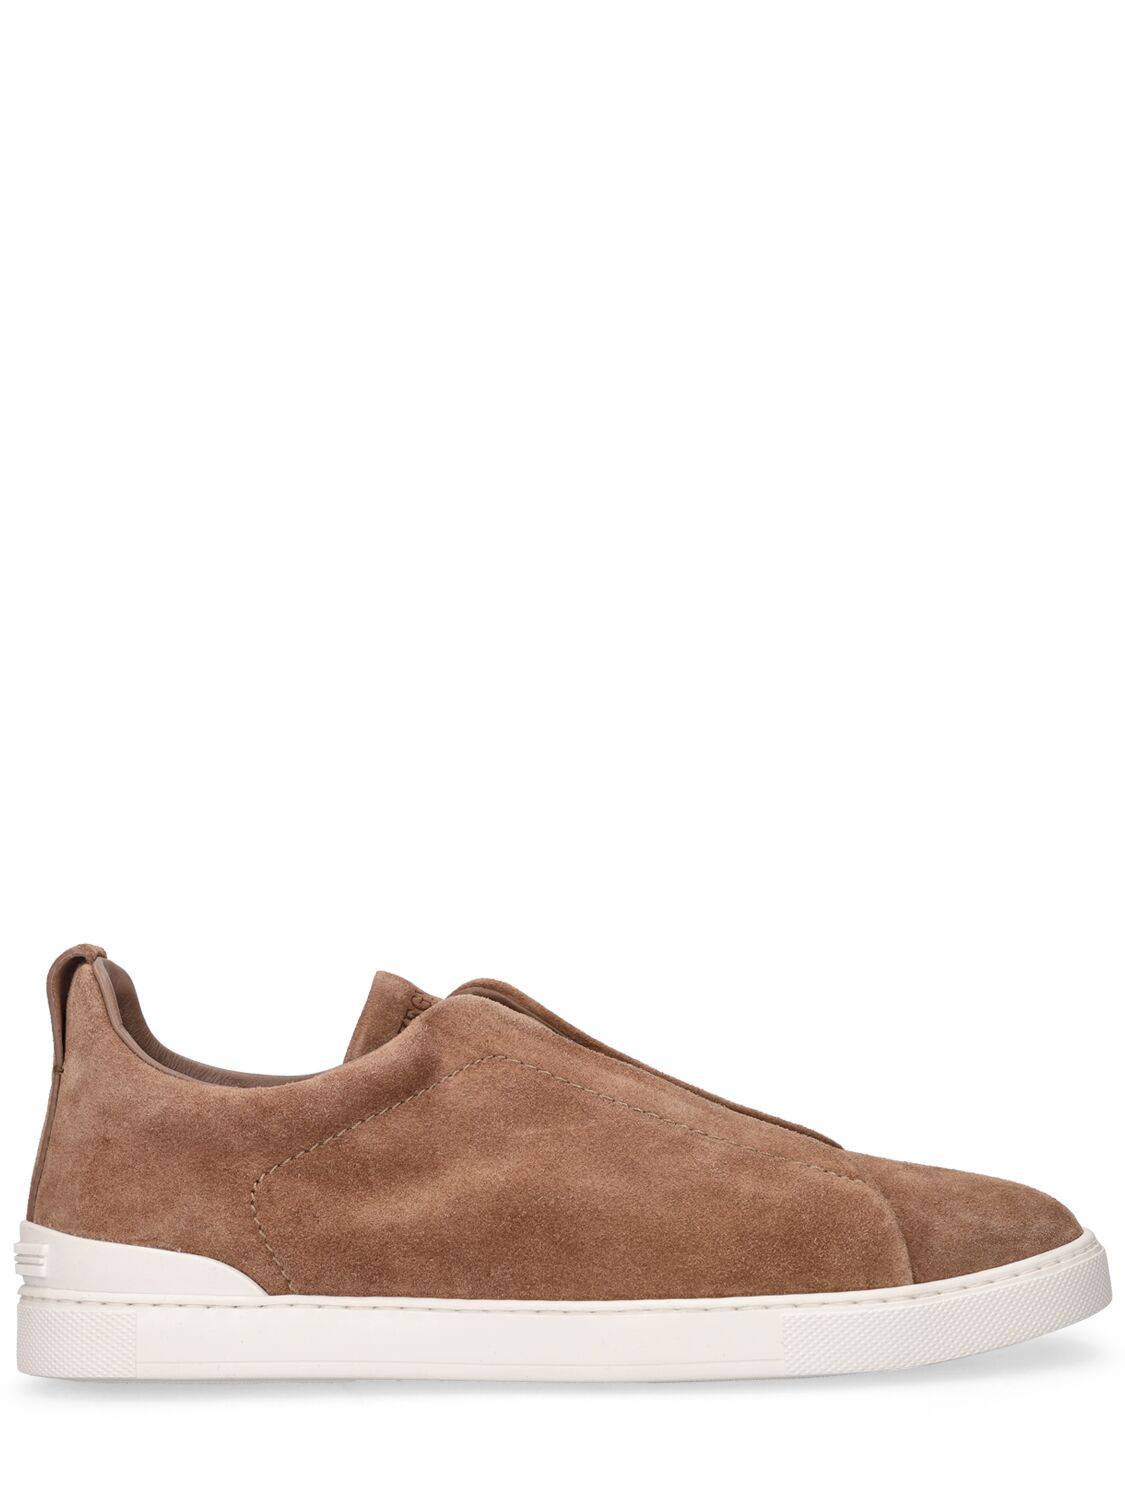 ZEGNA TRIPLE STITCH SUEDE LOW-TOP SNEAKERS